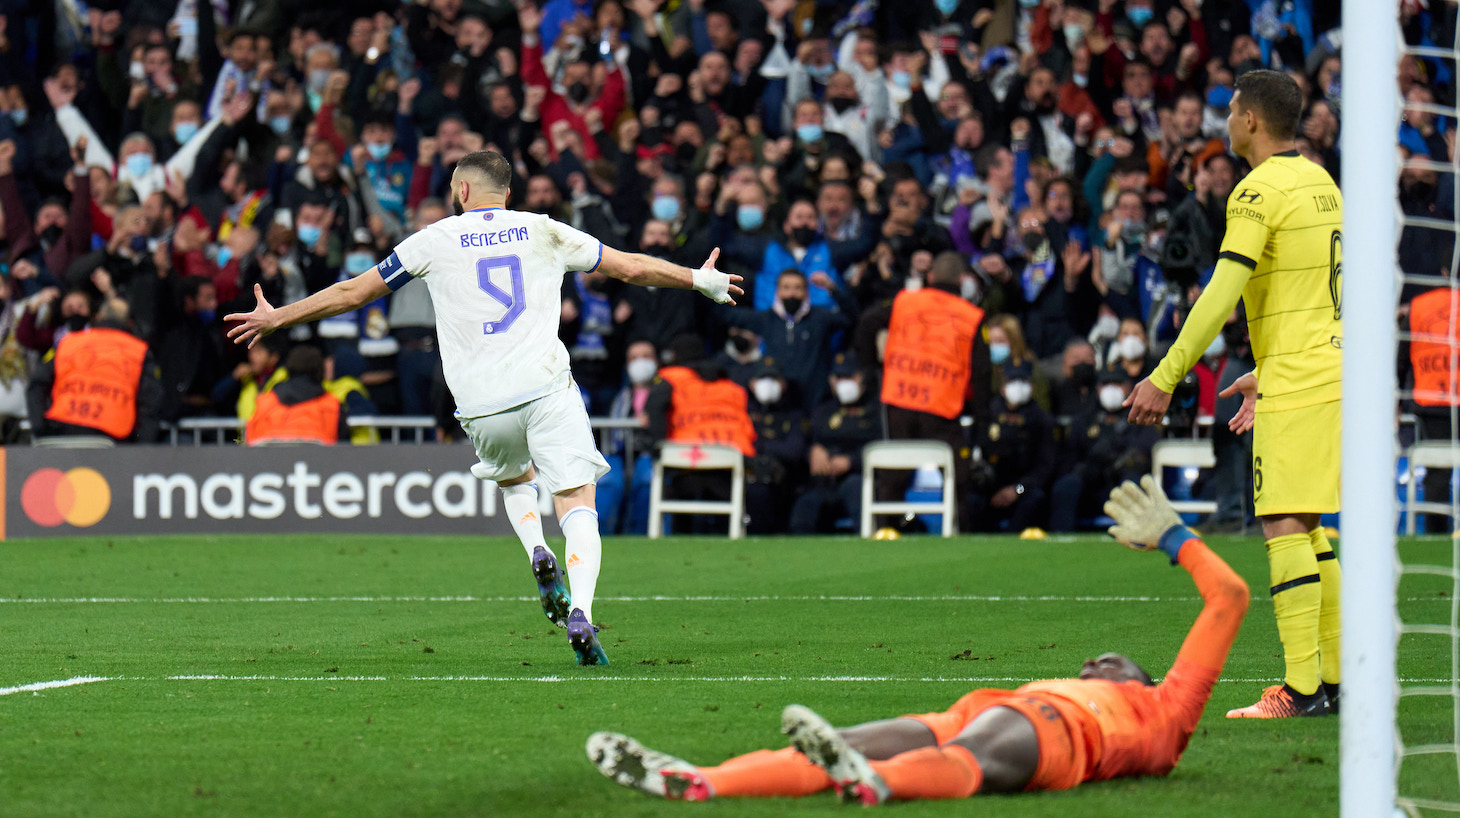 Karim Benzema of Real Madrid celebrates after scoring their team's second goal during the UEFA Champions League Quarter Final Leg Two match between Real Madrid and Chelsea FC at Estadio Santiago Bernabeu on April 12, 2022 in Madrid, Spain.